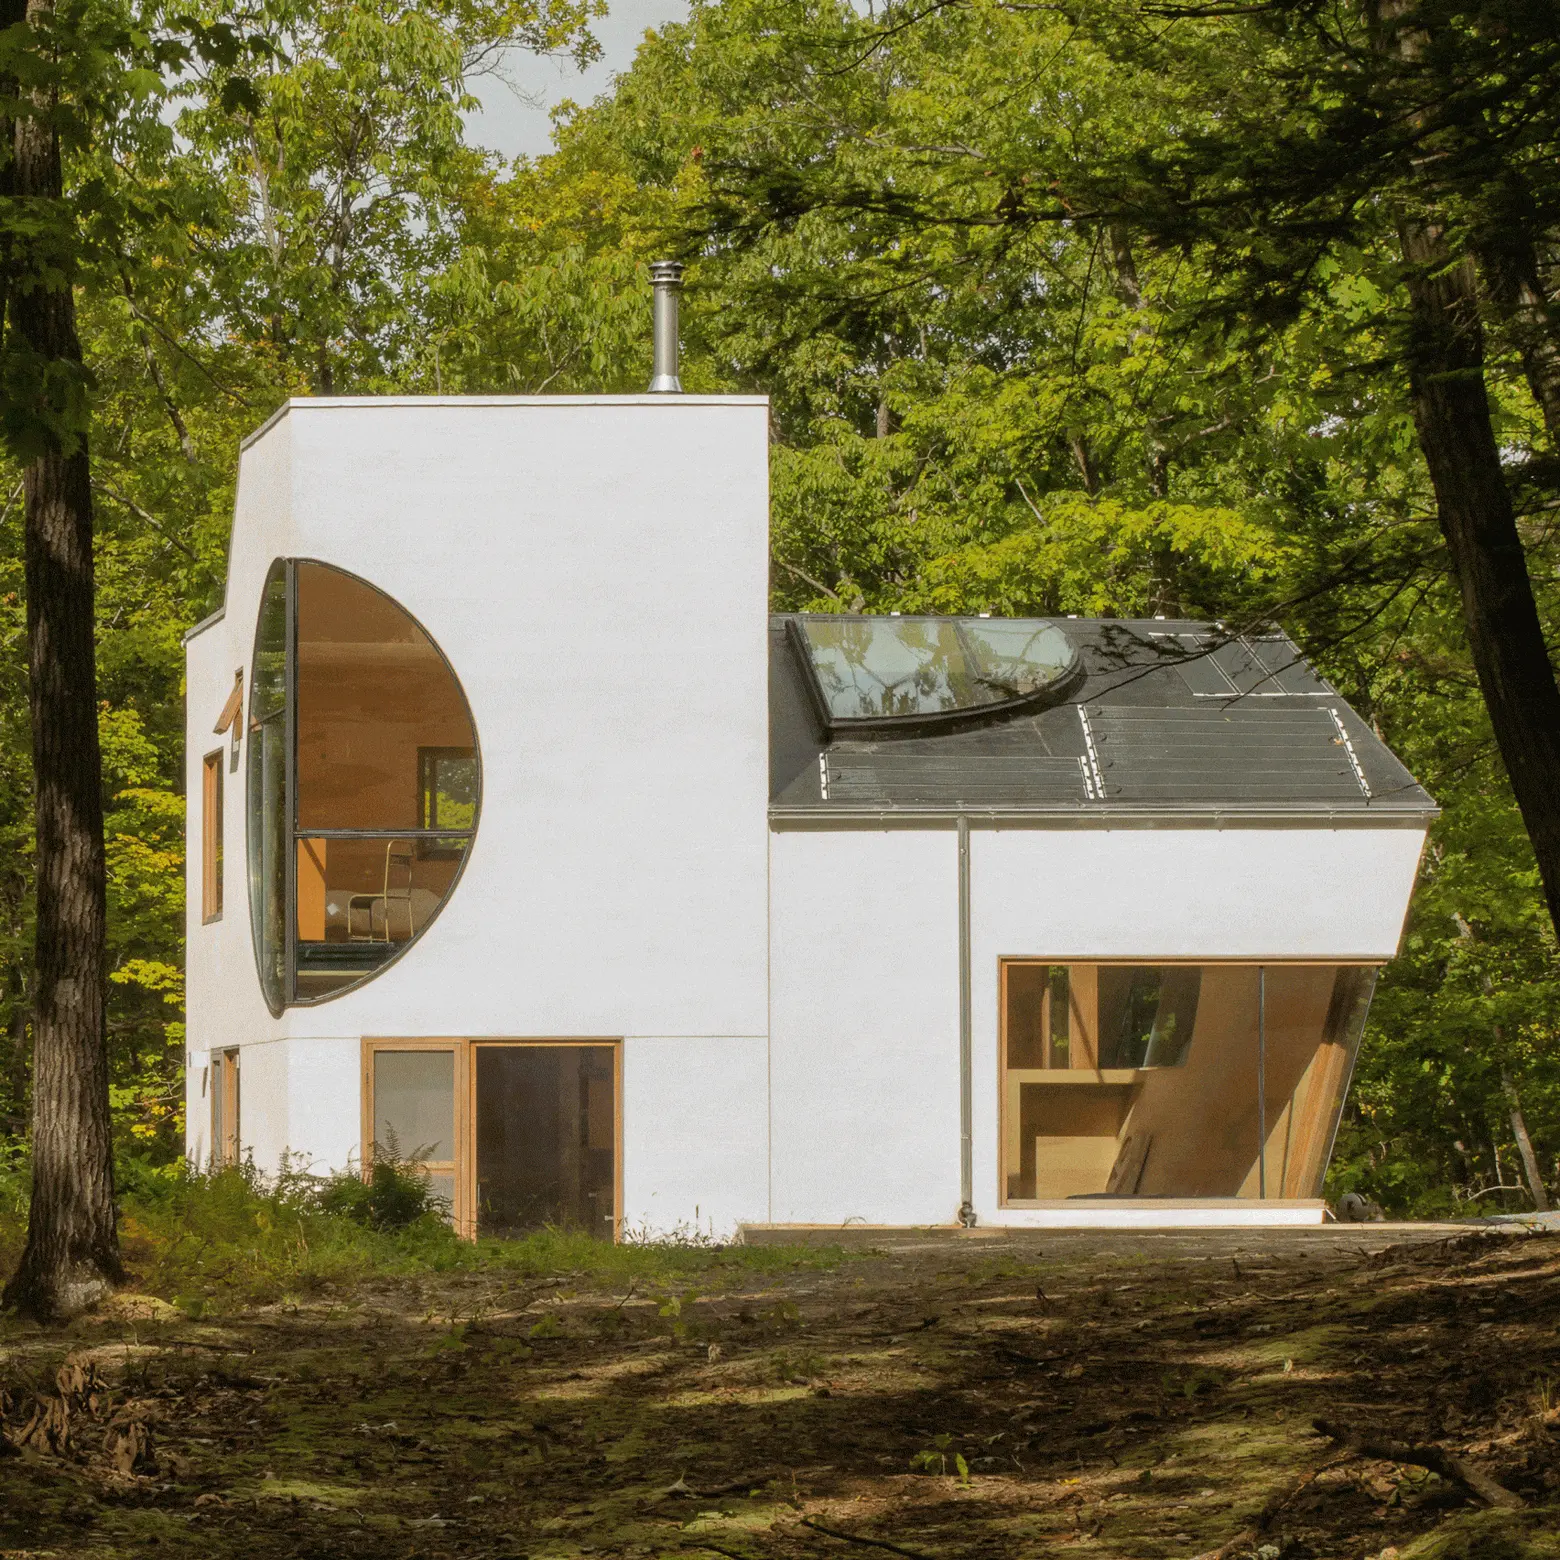 Steven Holl, Ex of In House, Rhinebeck